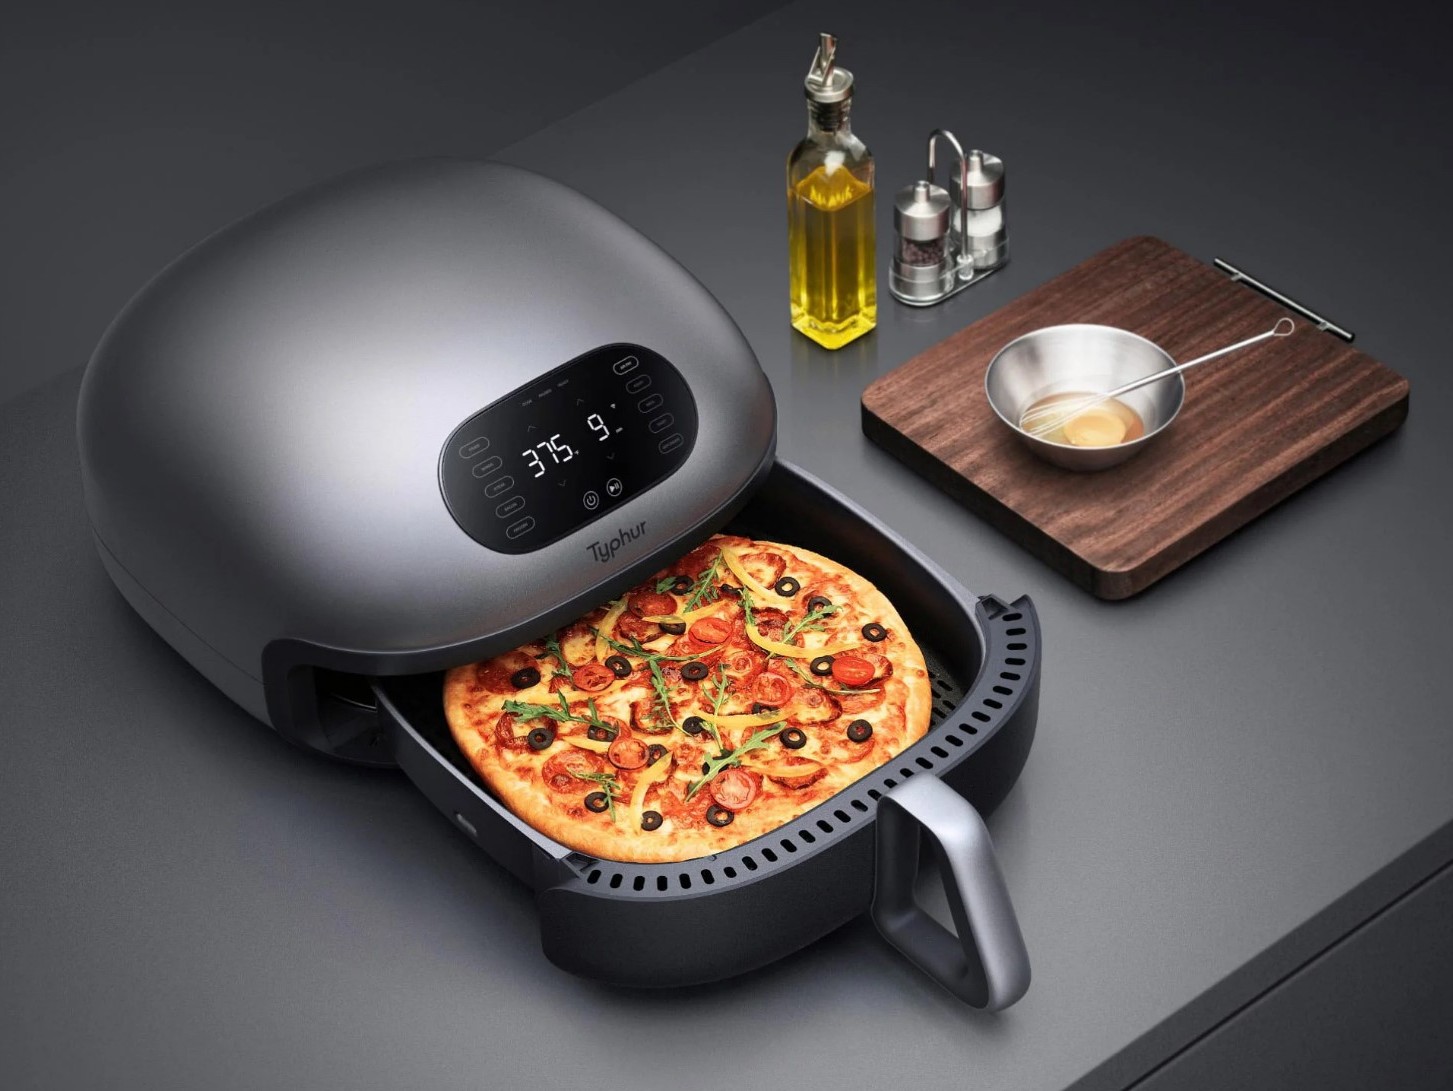 Typhur Dome AirFryer can even hold a 12" pizza